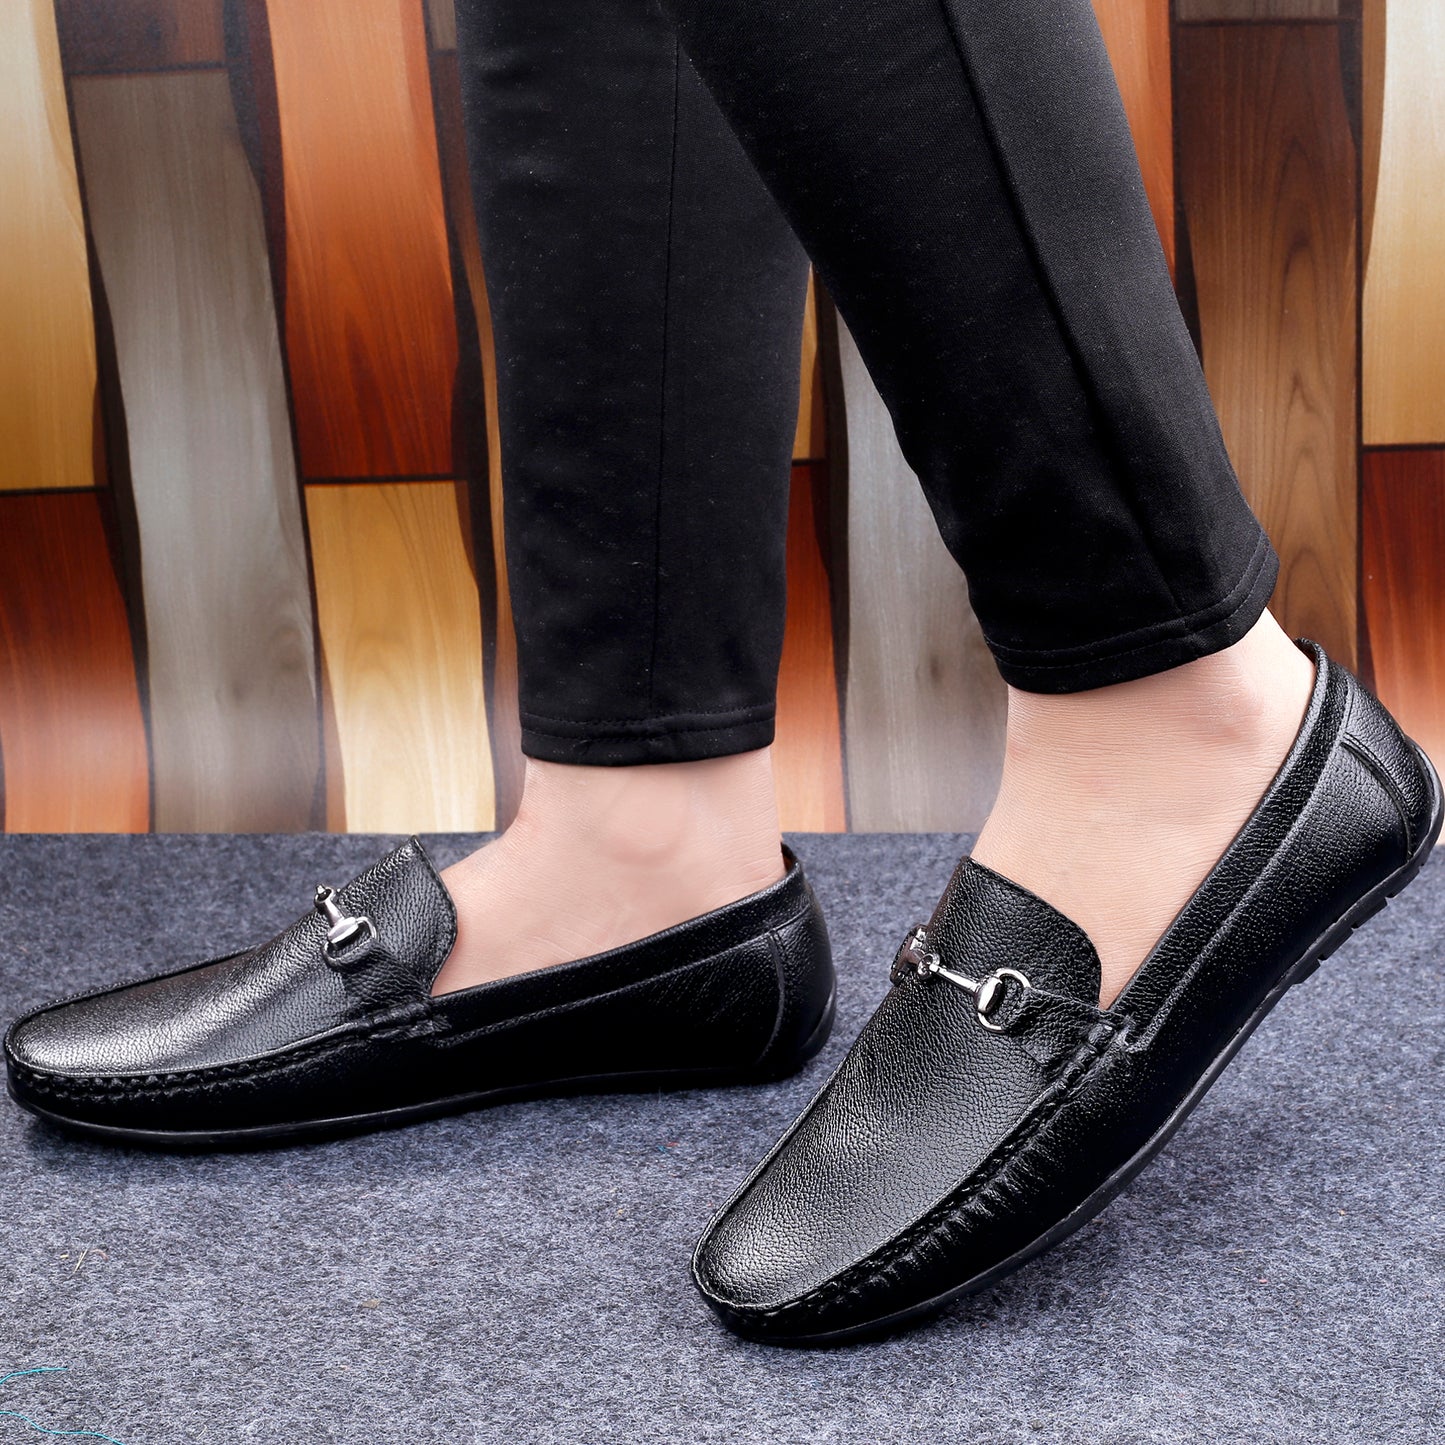 Bxxy Stylish Premium Vegan Leather Casual Loafer Shoes for all Season